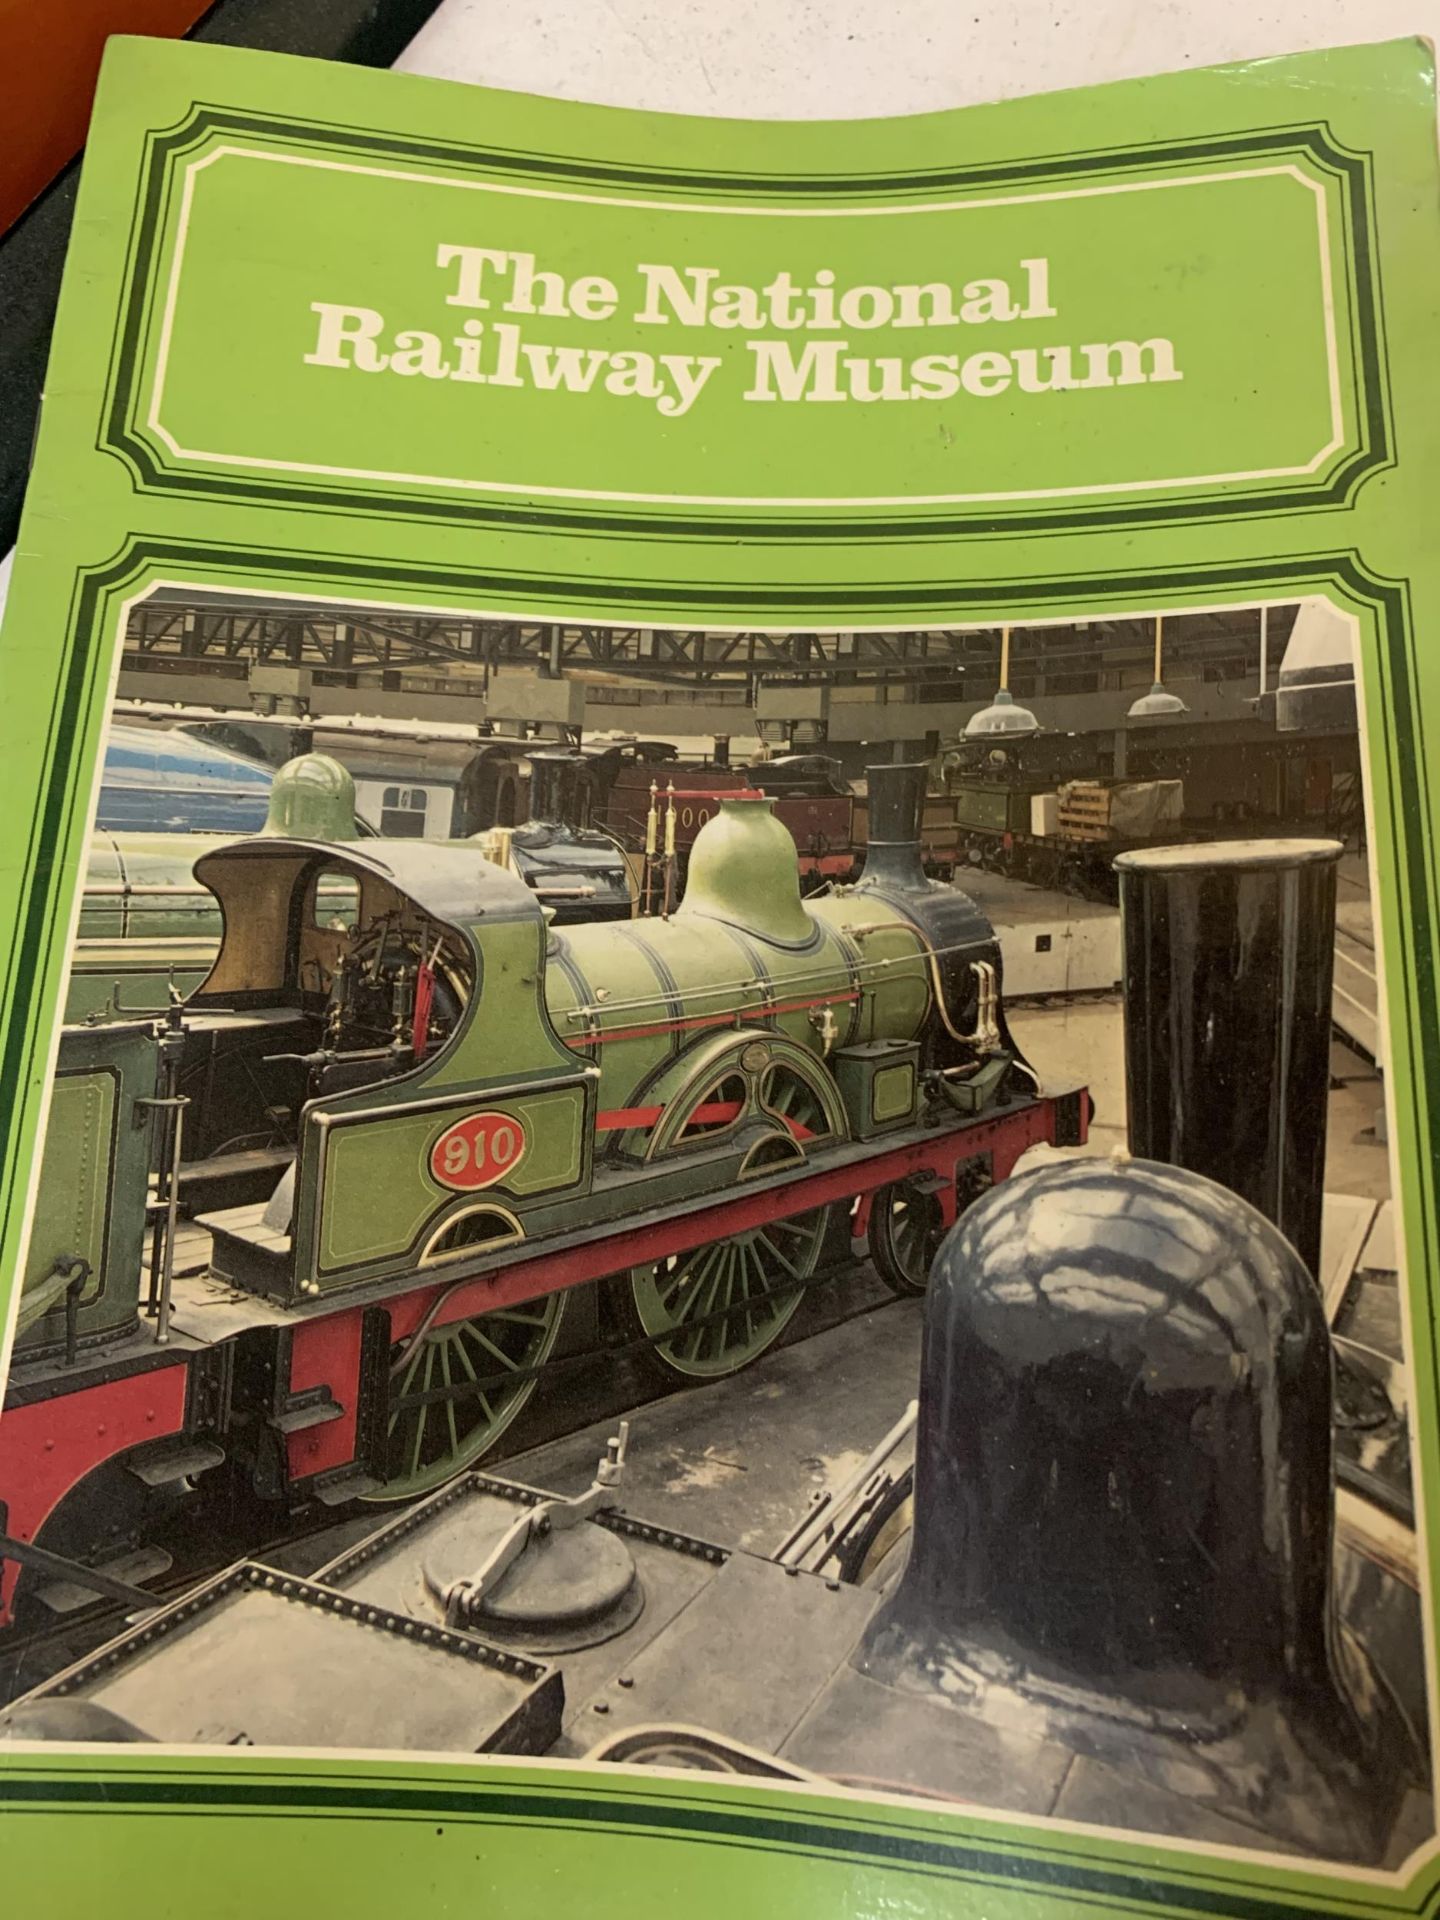 A MINIATURE MAMOD STEAM ENGINE AND A NATIONAL RAILWAY MUSEUM BOOK - Image 4 of 4